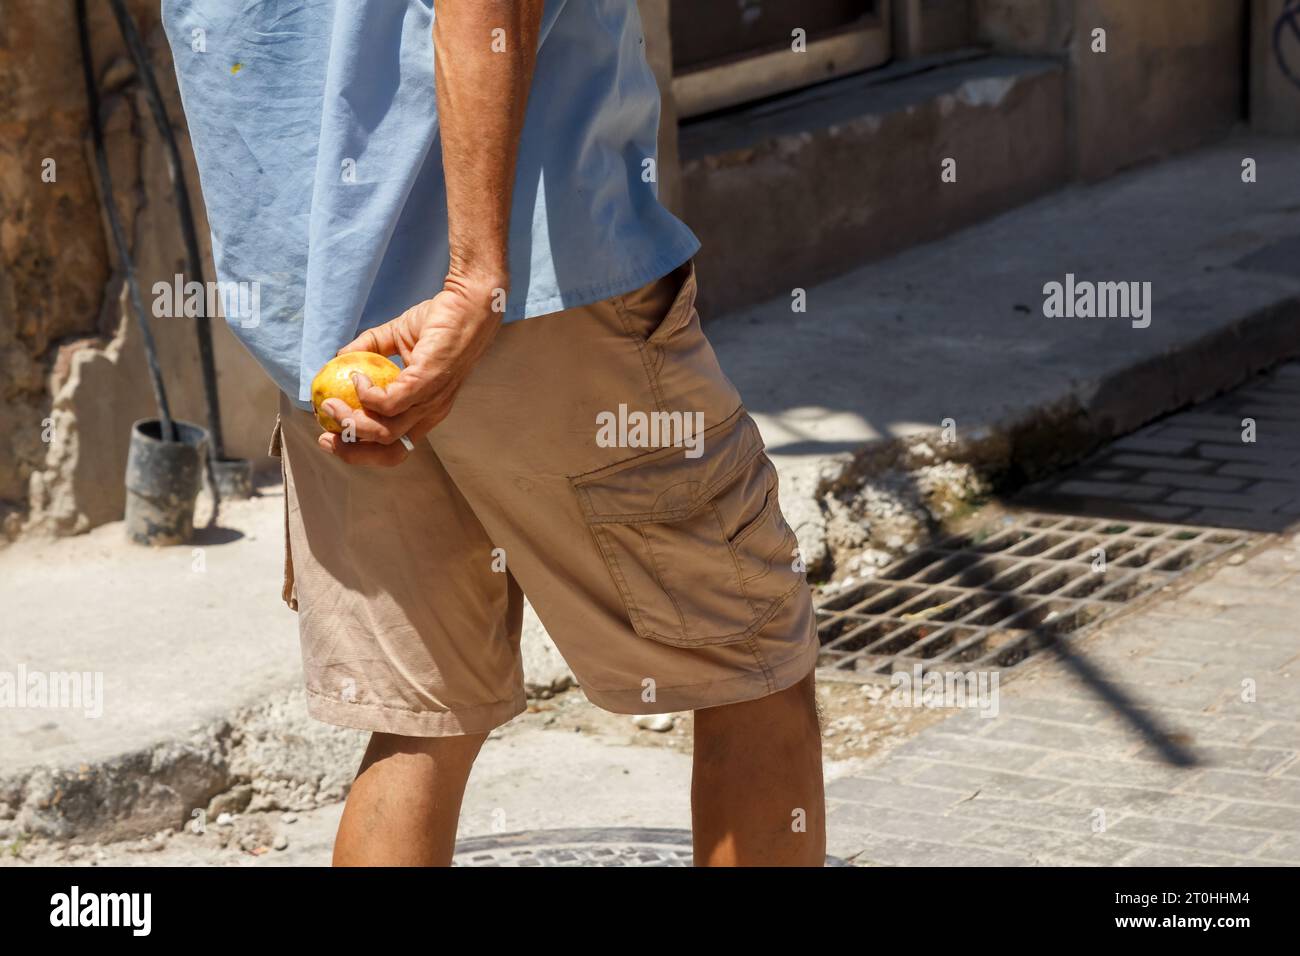 A Cuban man holds a ripe guava fruit in his hand as he walks on a city street in Old Havana. The sidewalk is damaged in the corner. Stock Photo